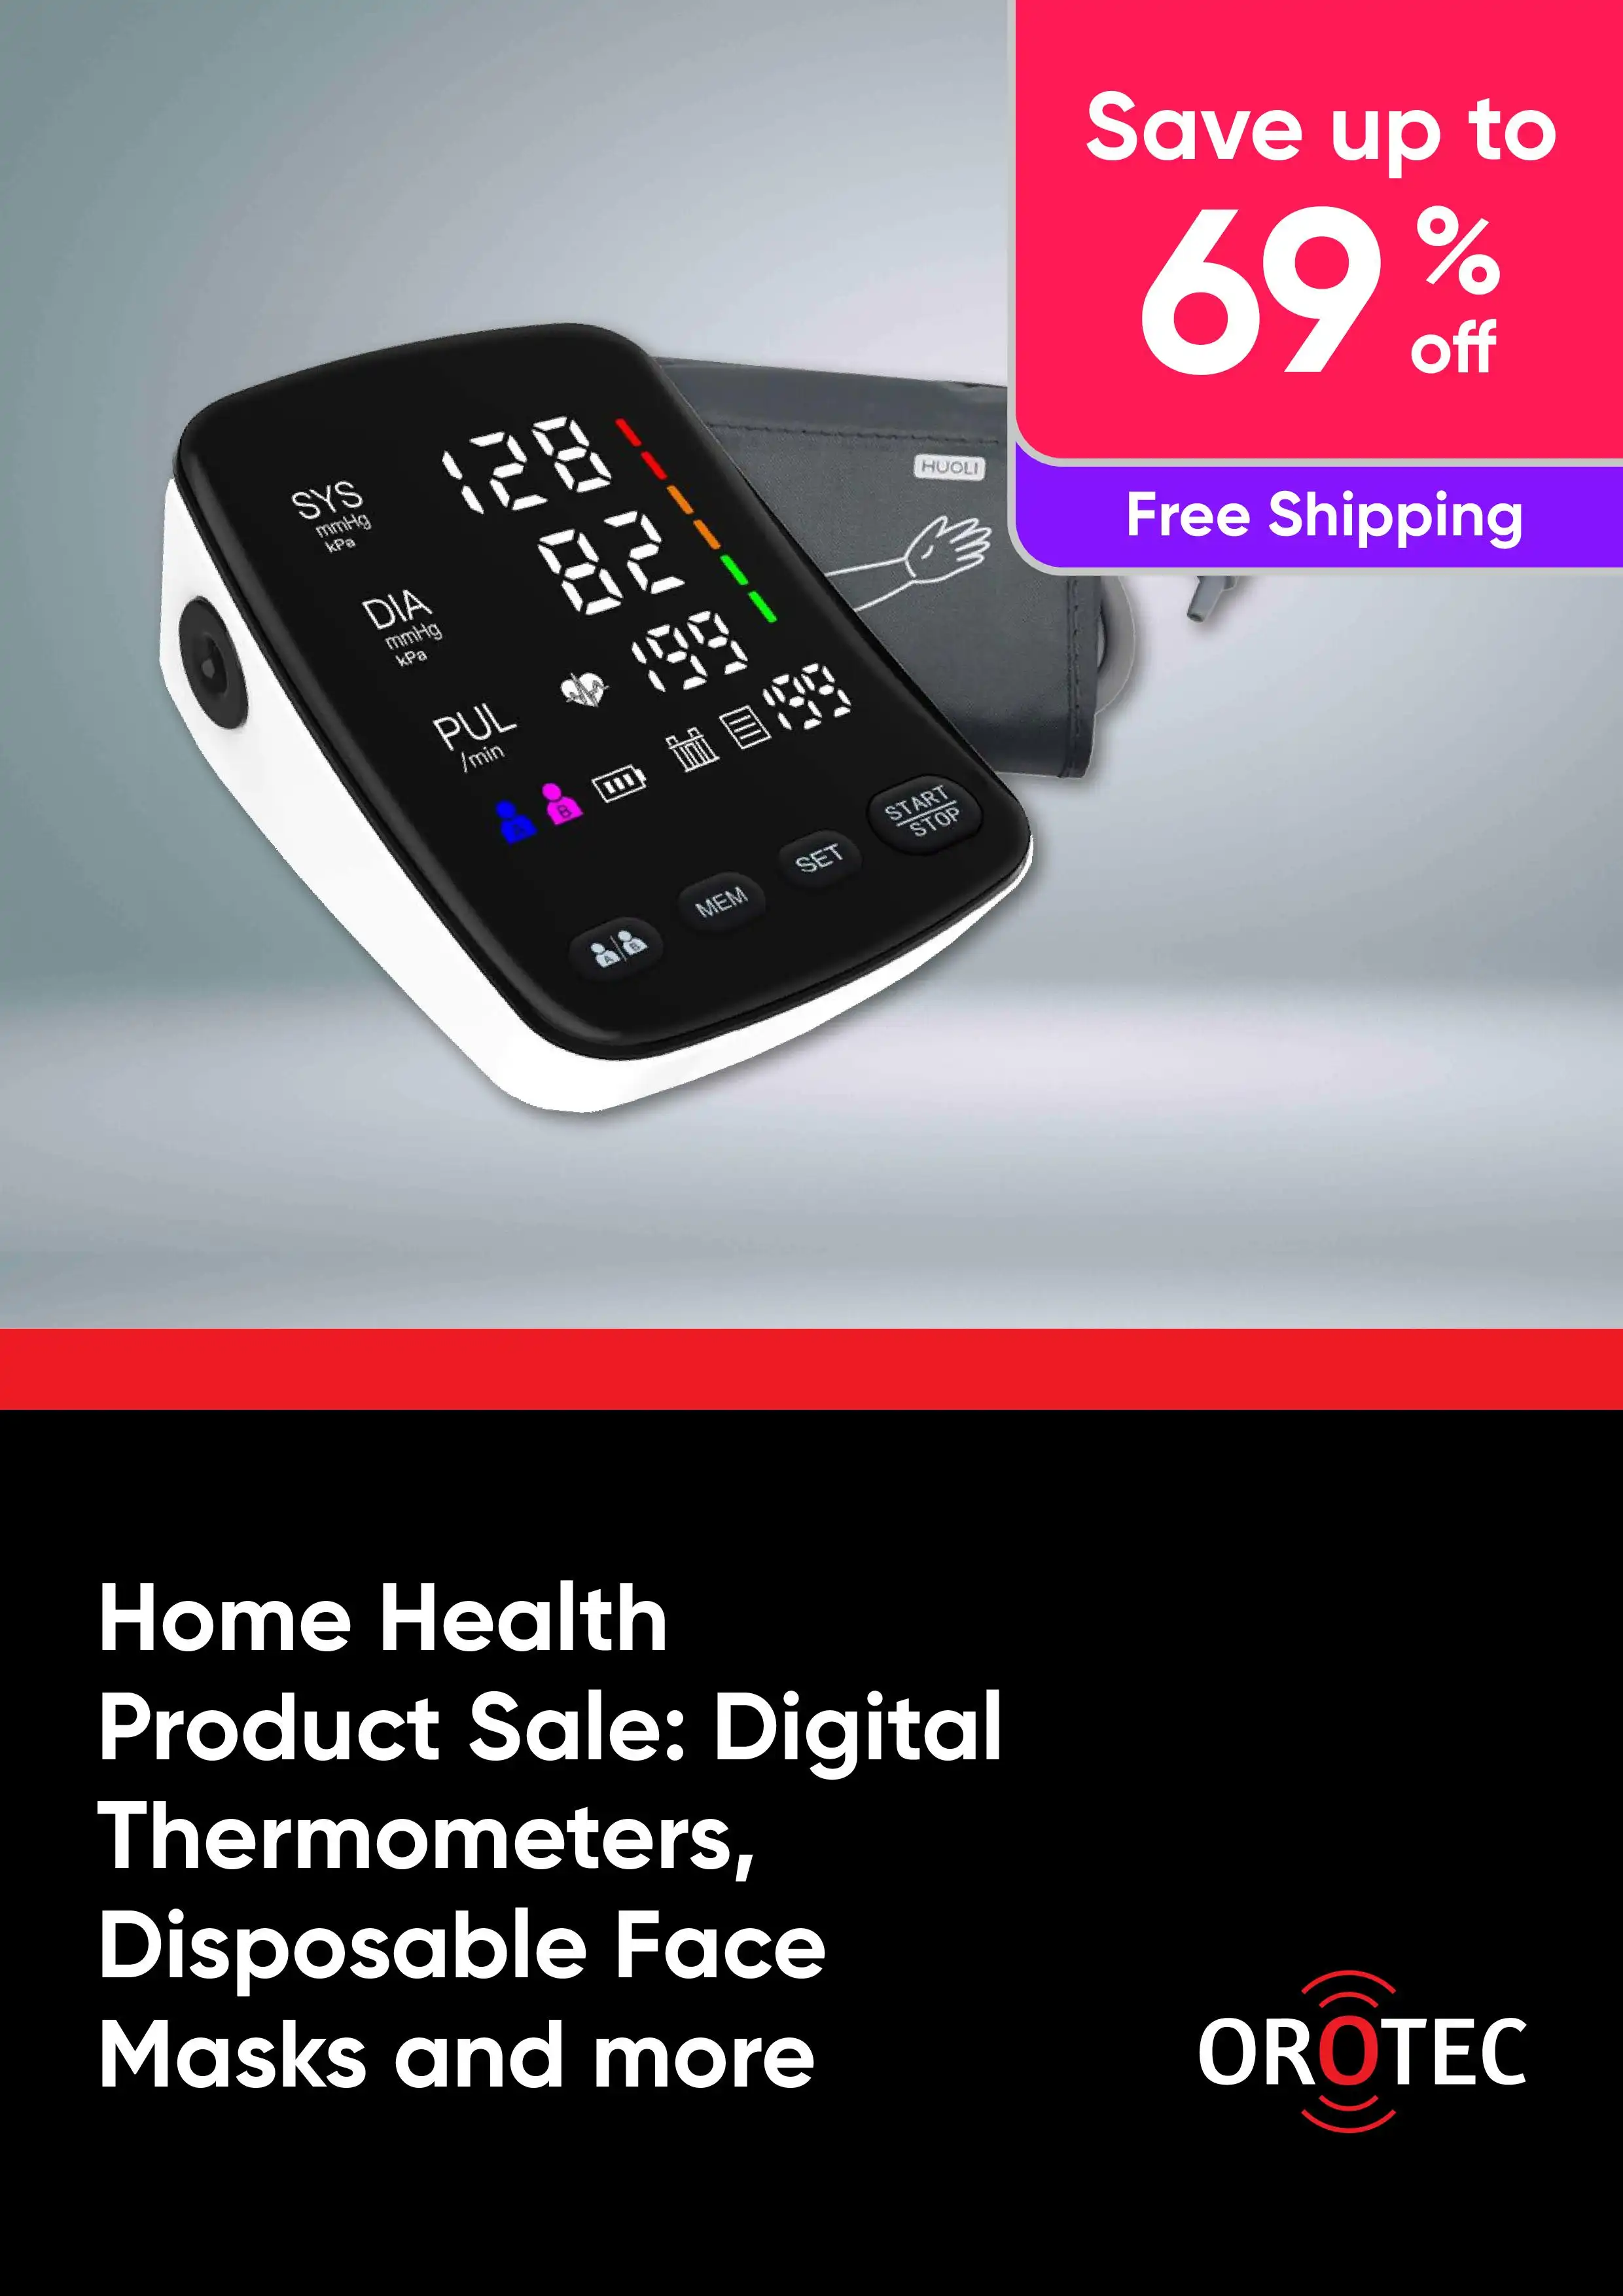 Home Health Product Sale - Digital Thermometers, Disposable Face Masks and More - up to 69% off 